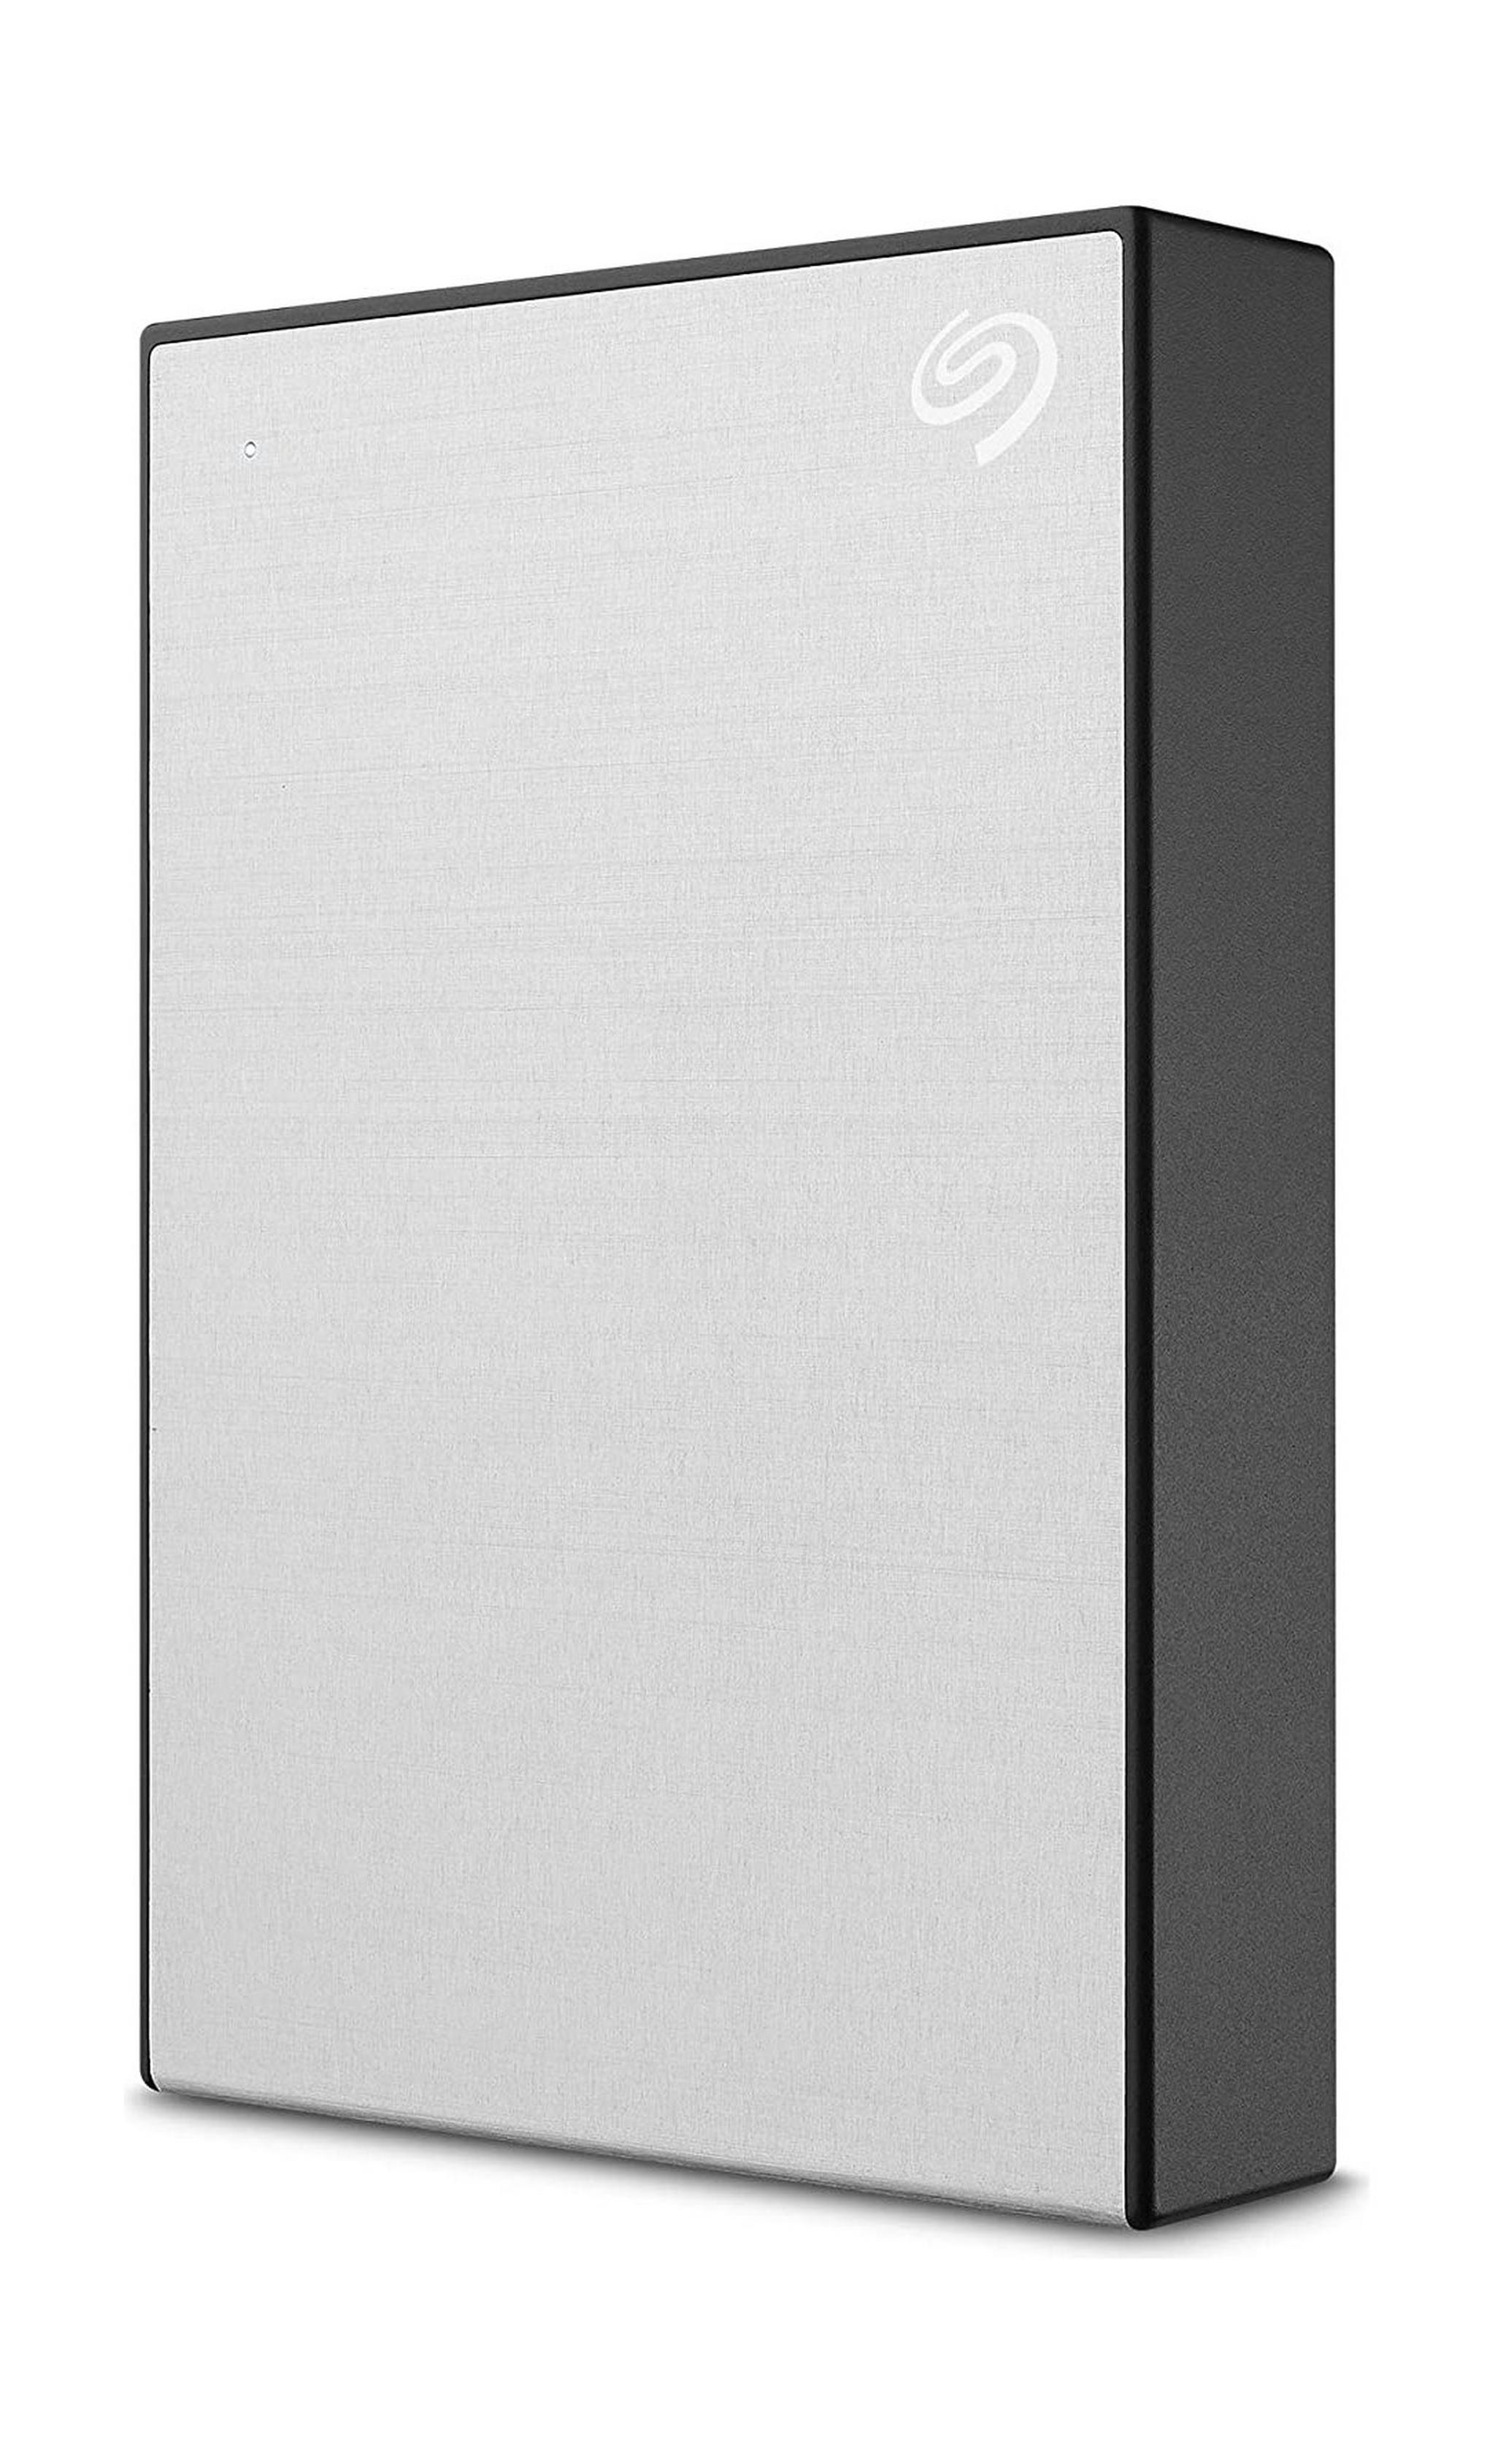 Seagate One Touch 1TB USB 3.2 Gen 1 External Hard Drive - Silver